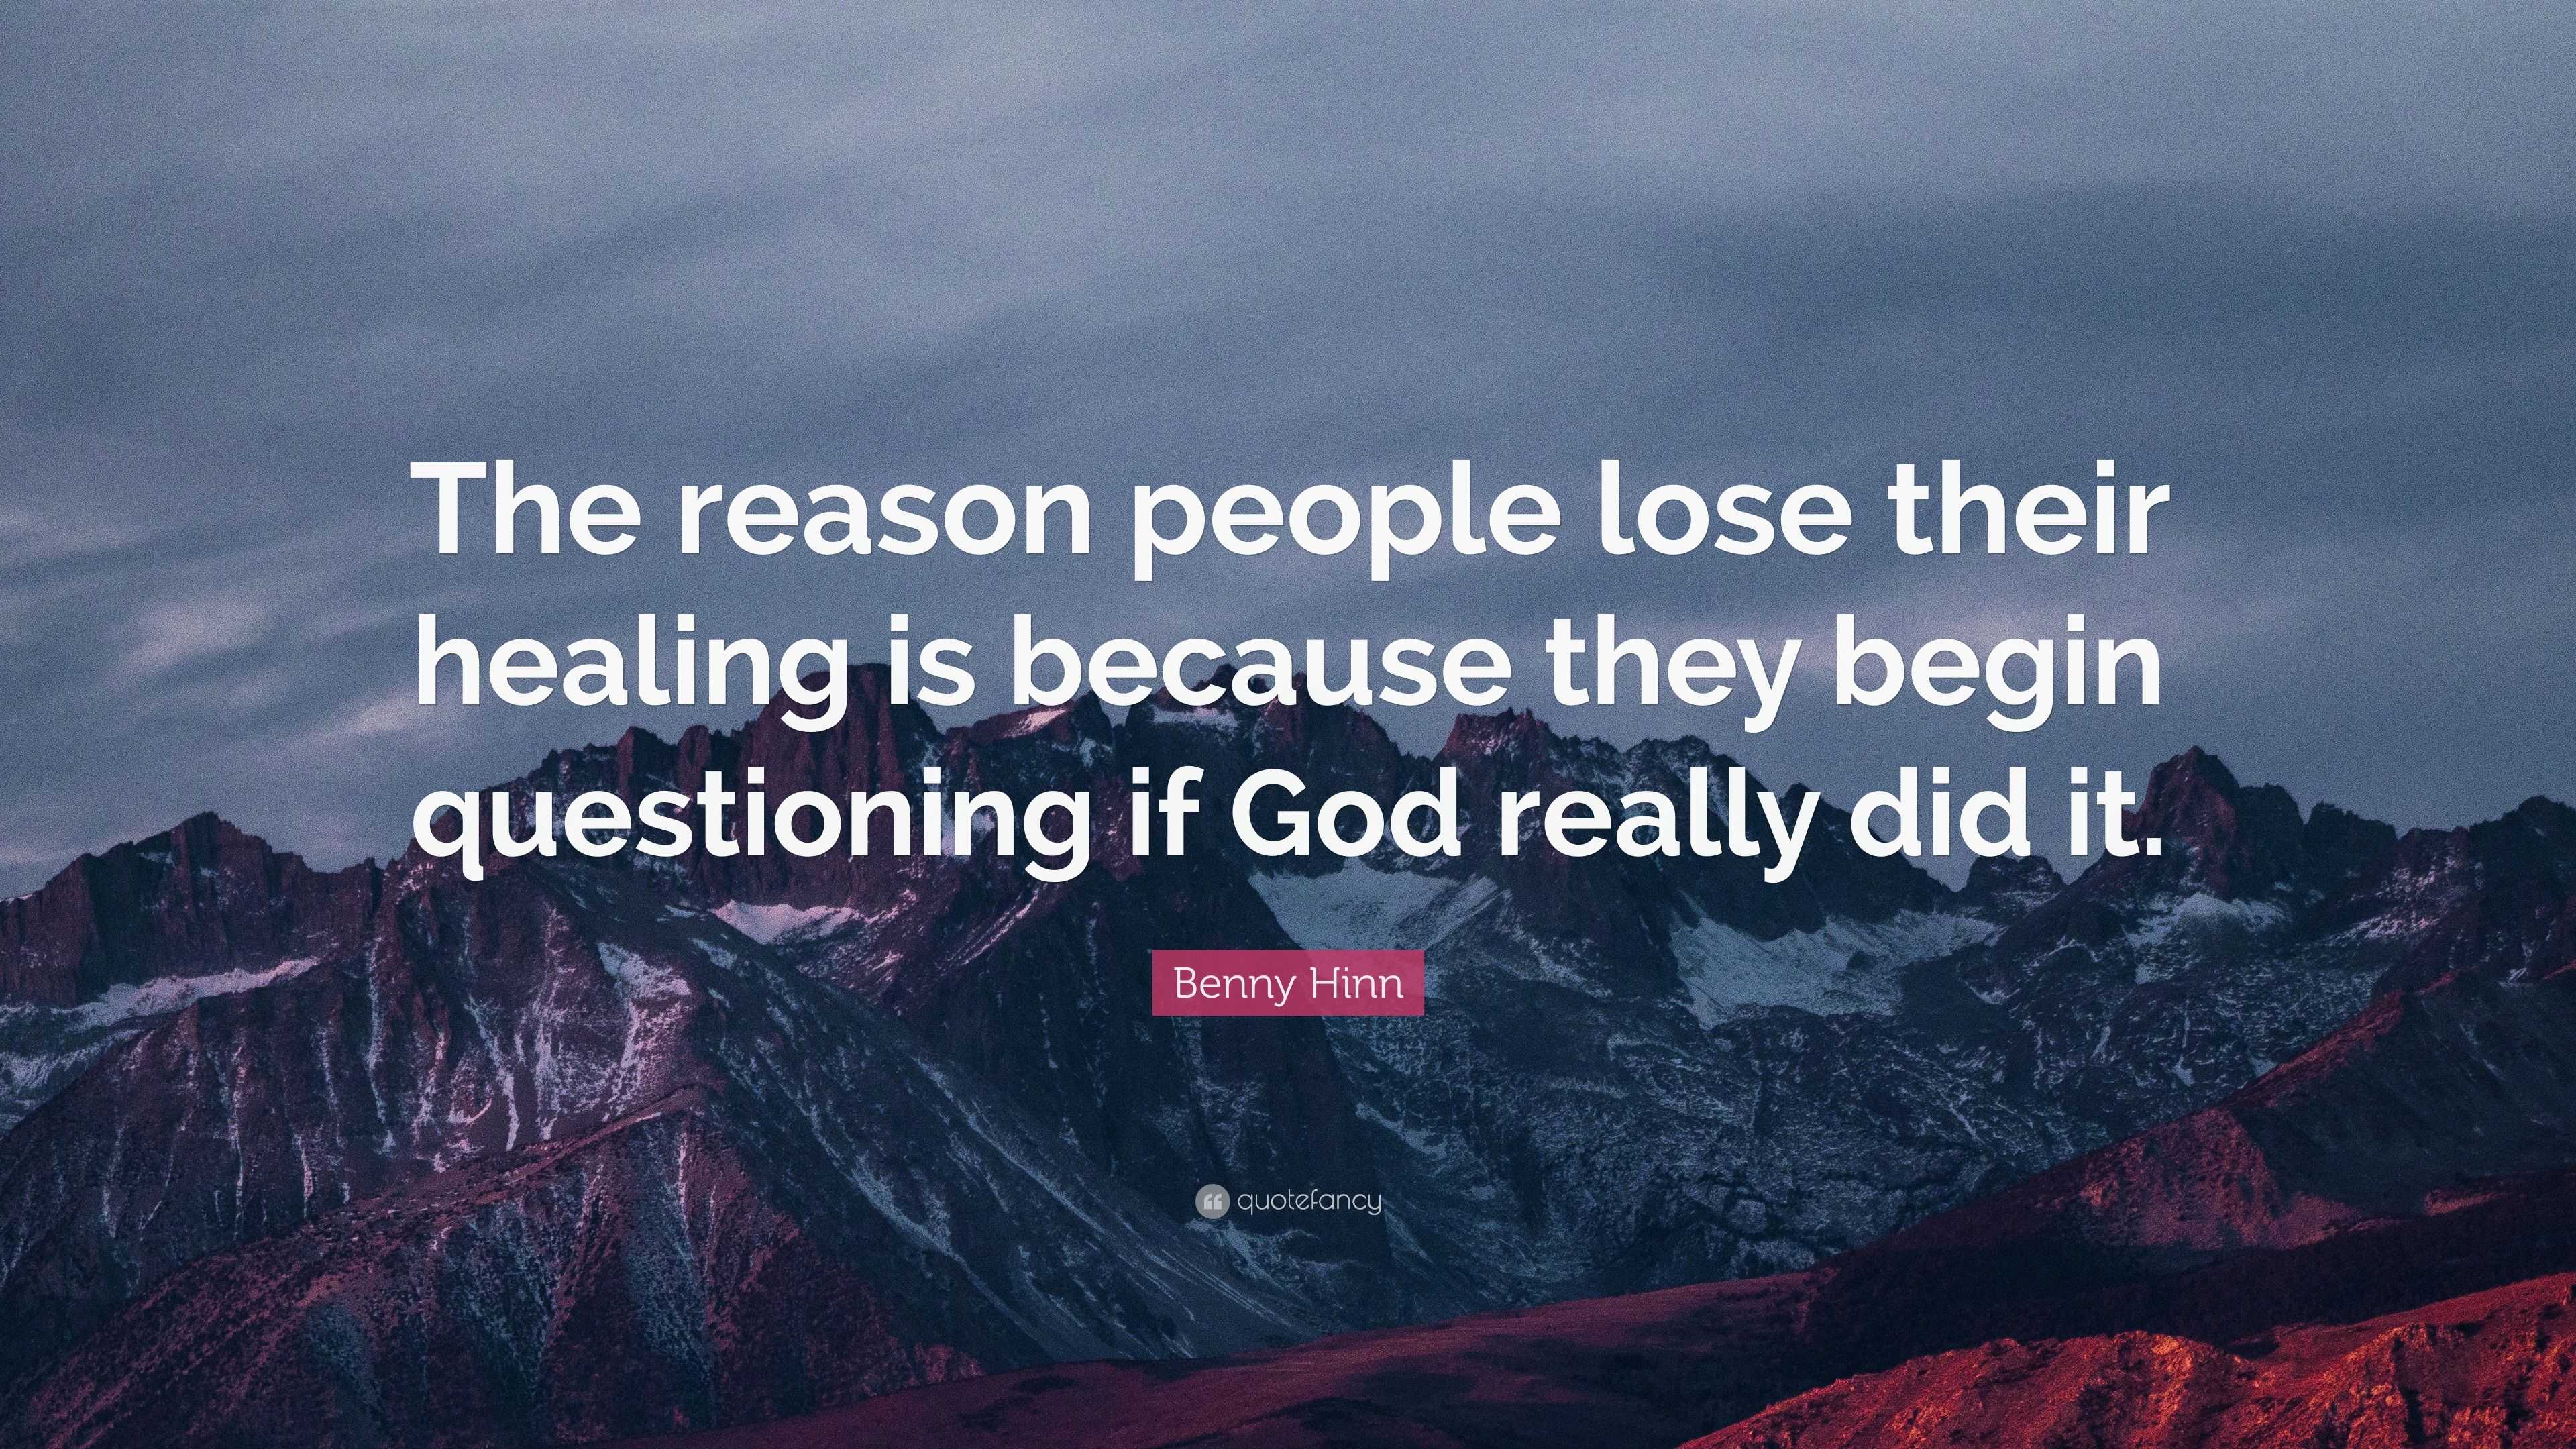 Benny Hinn Quote: “The reason people lose their healing is because they  begin questioning if God